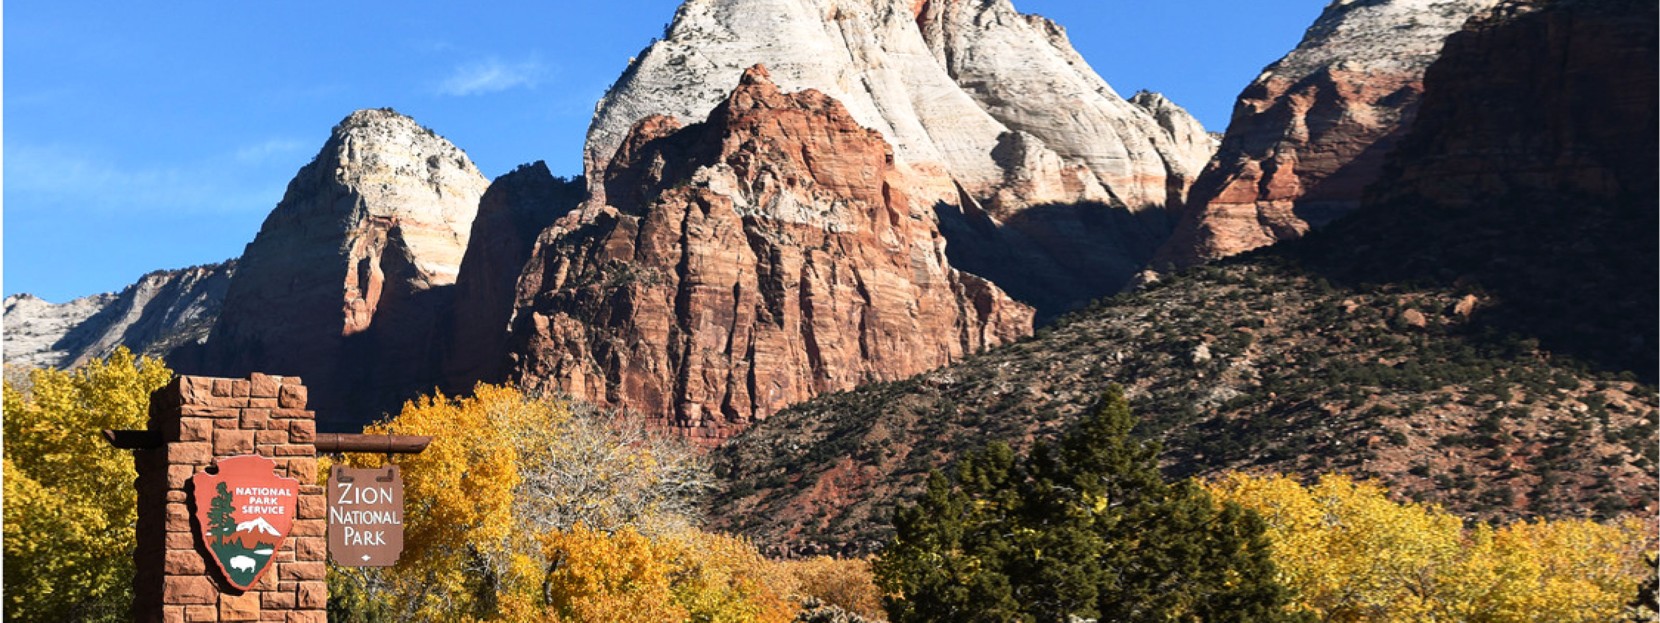 A beautiful rock formation against a bright blue sky with a Zion National Park entrance sign in the foreground.